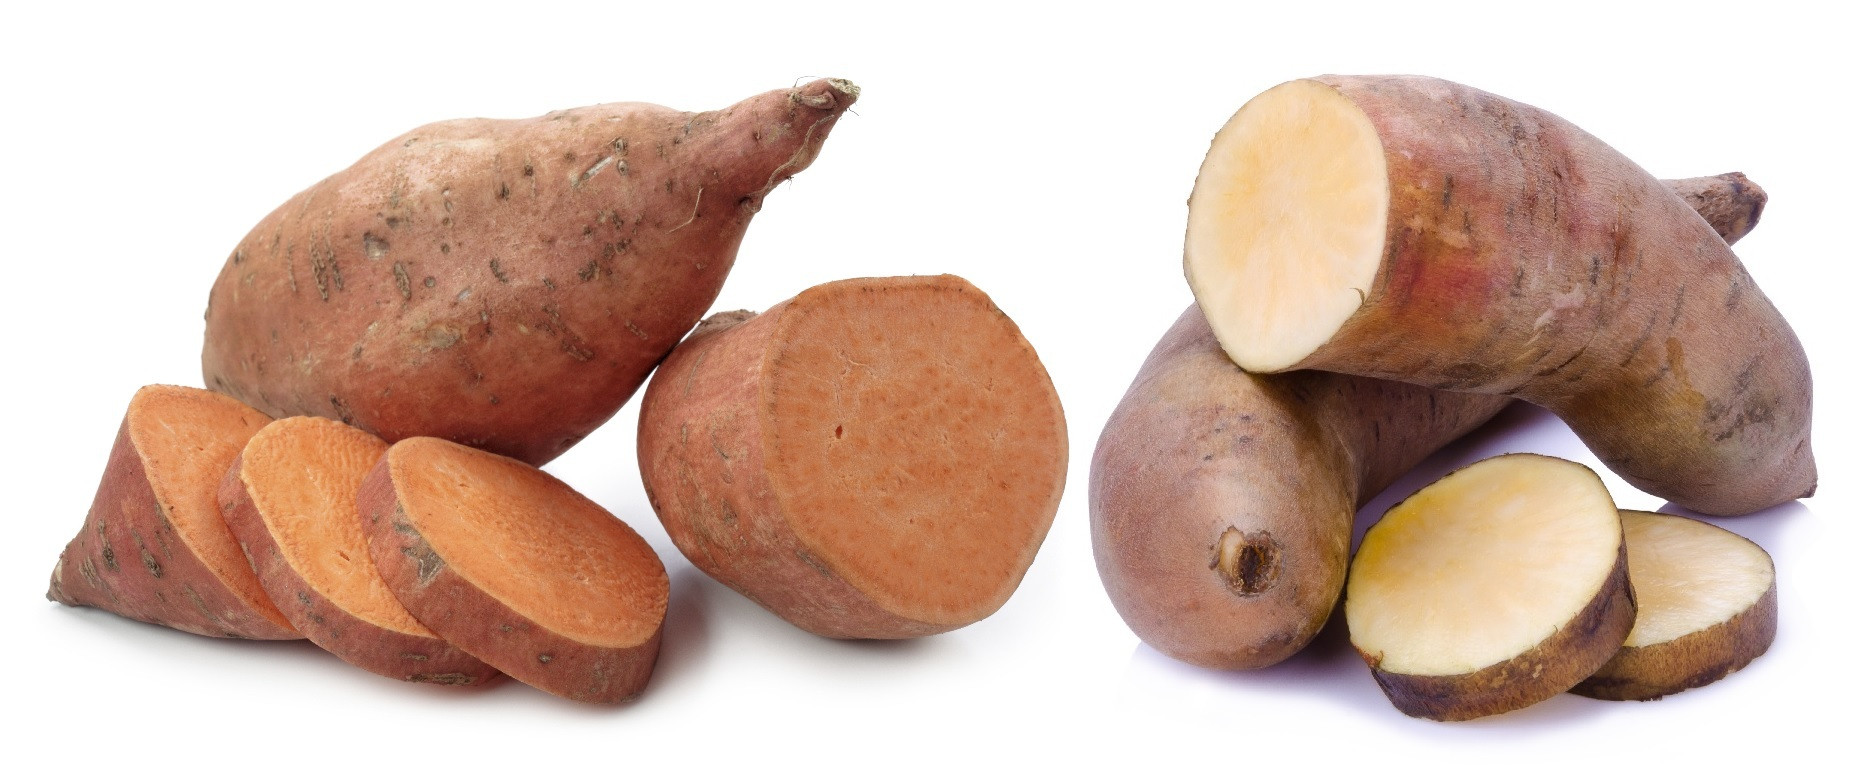 Difference Between Yams And Sweet Potato
 8 Ways to tell the difference between sweet potatoes and